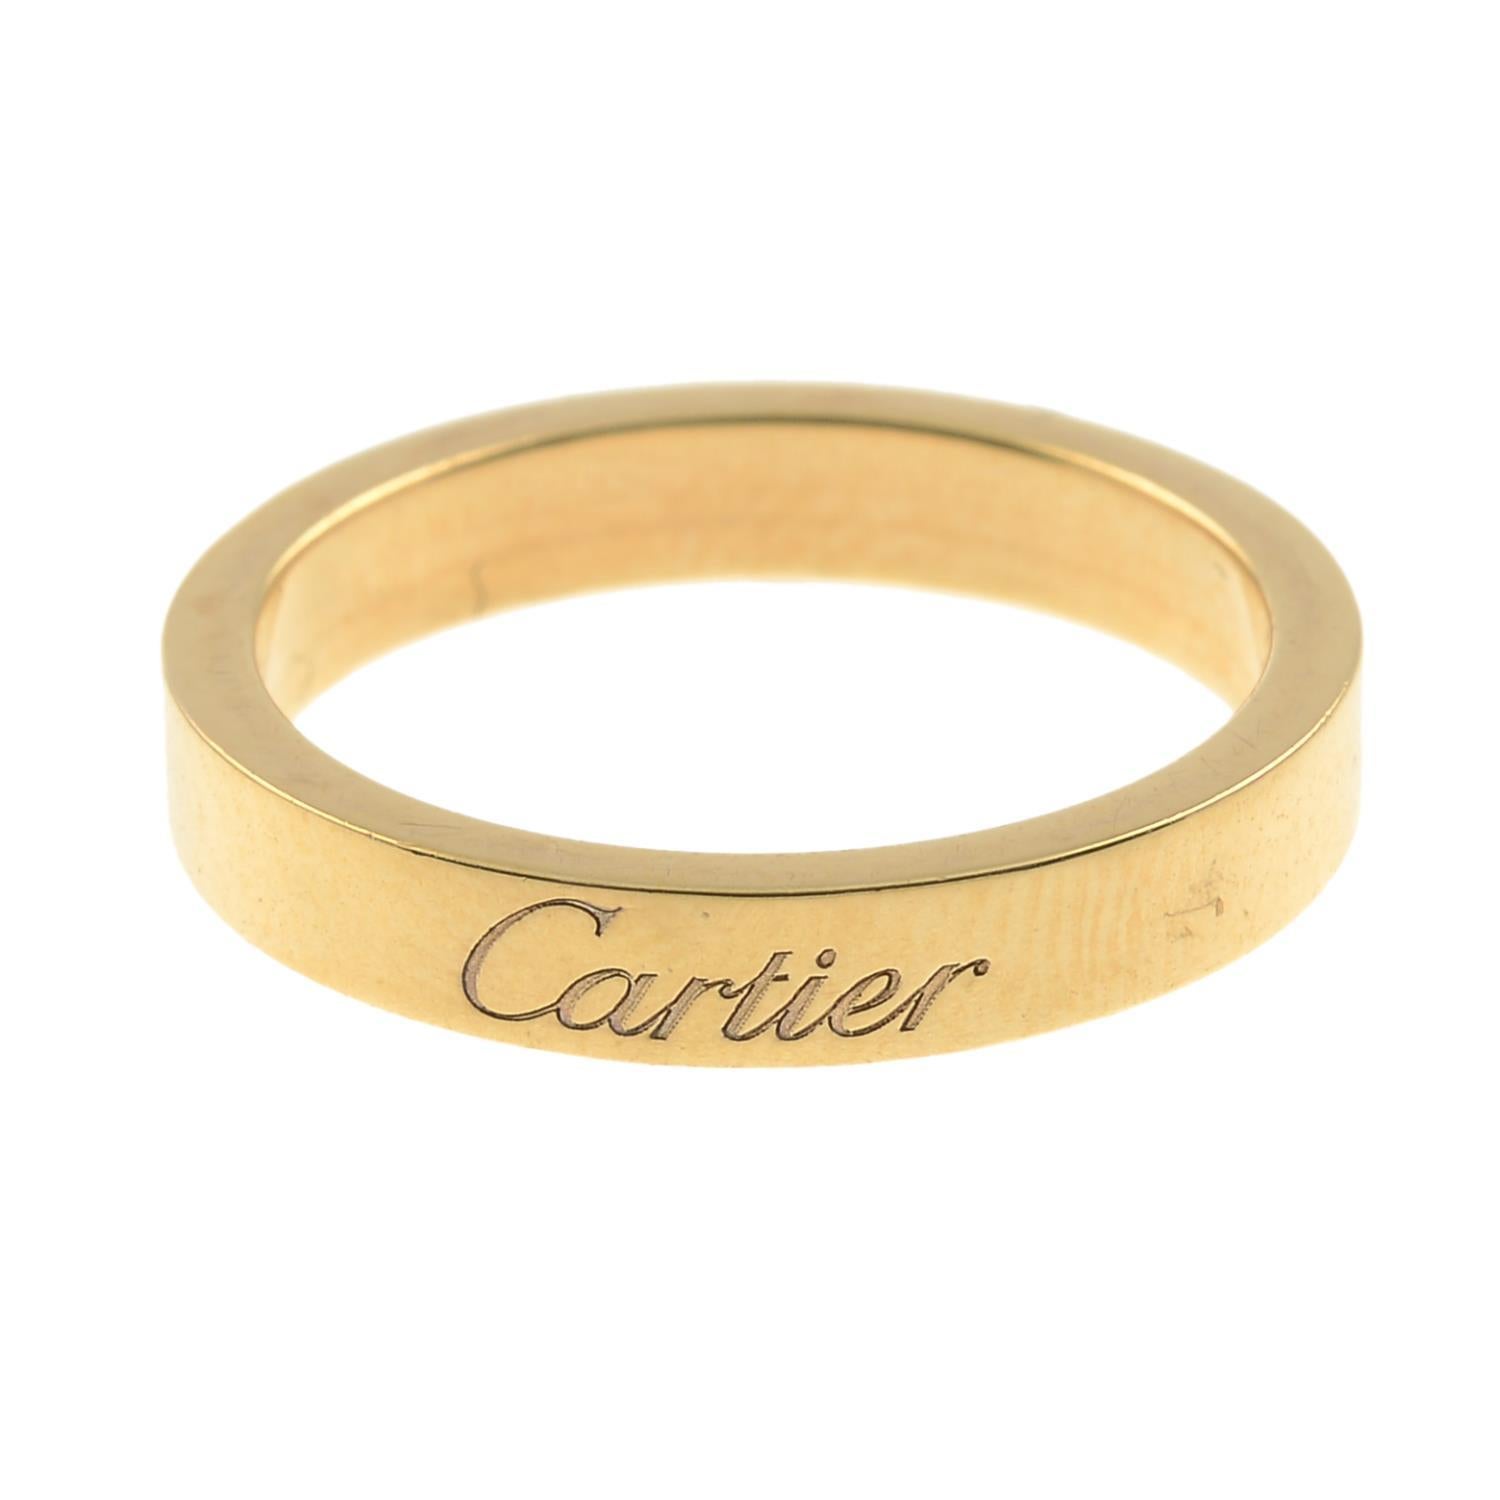 Contemporary Yellow Gold Band Ring by Cartier